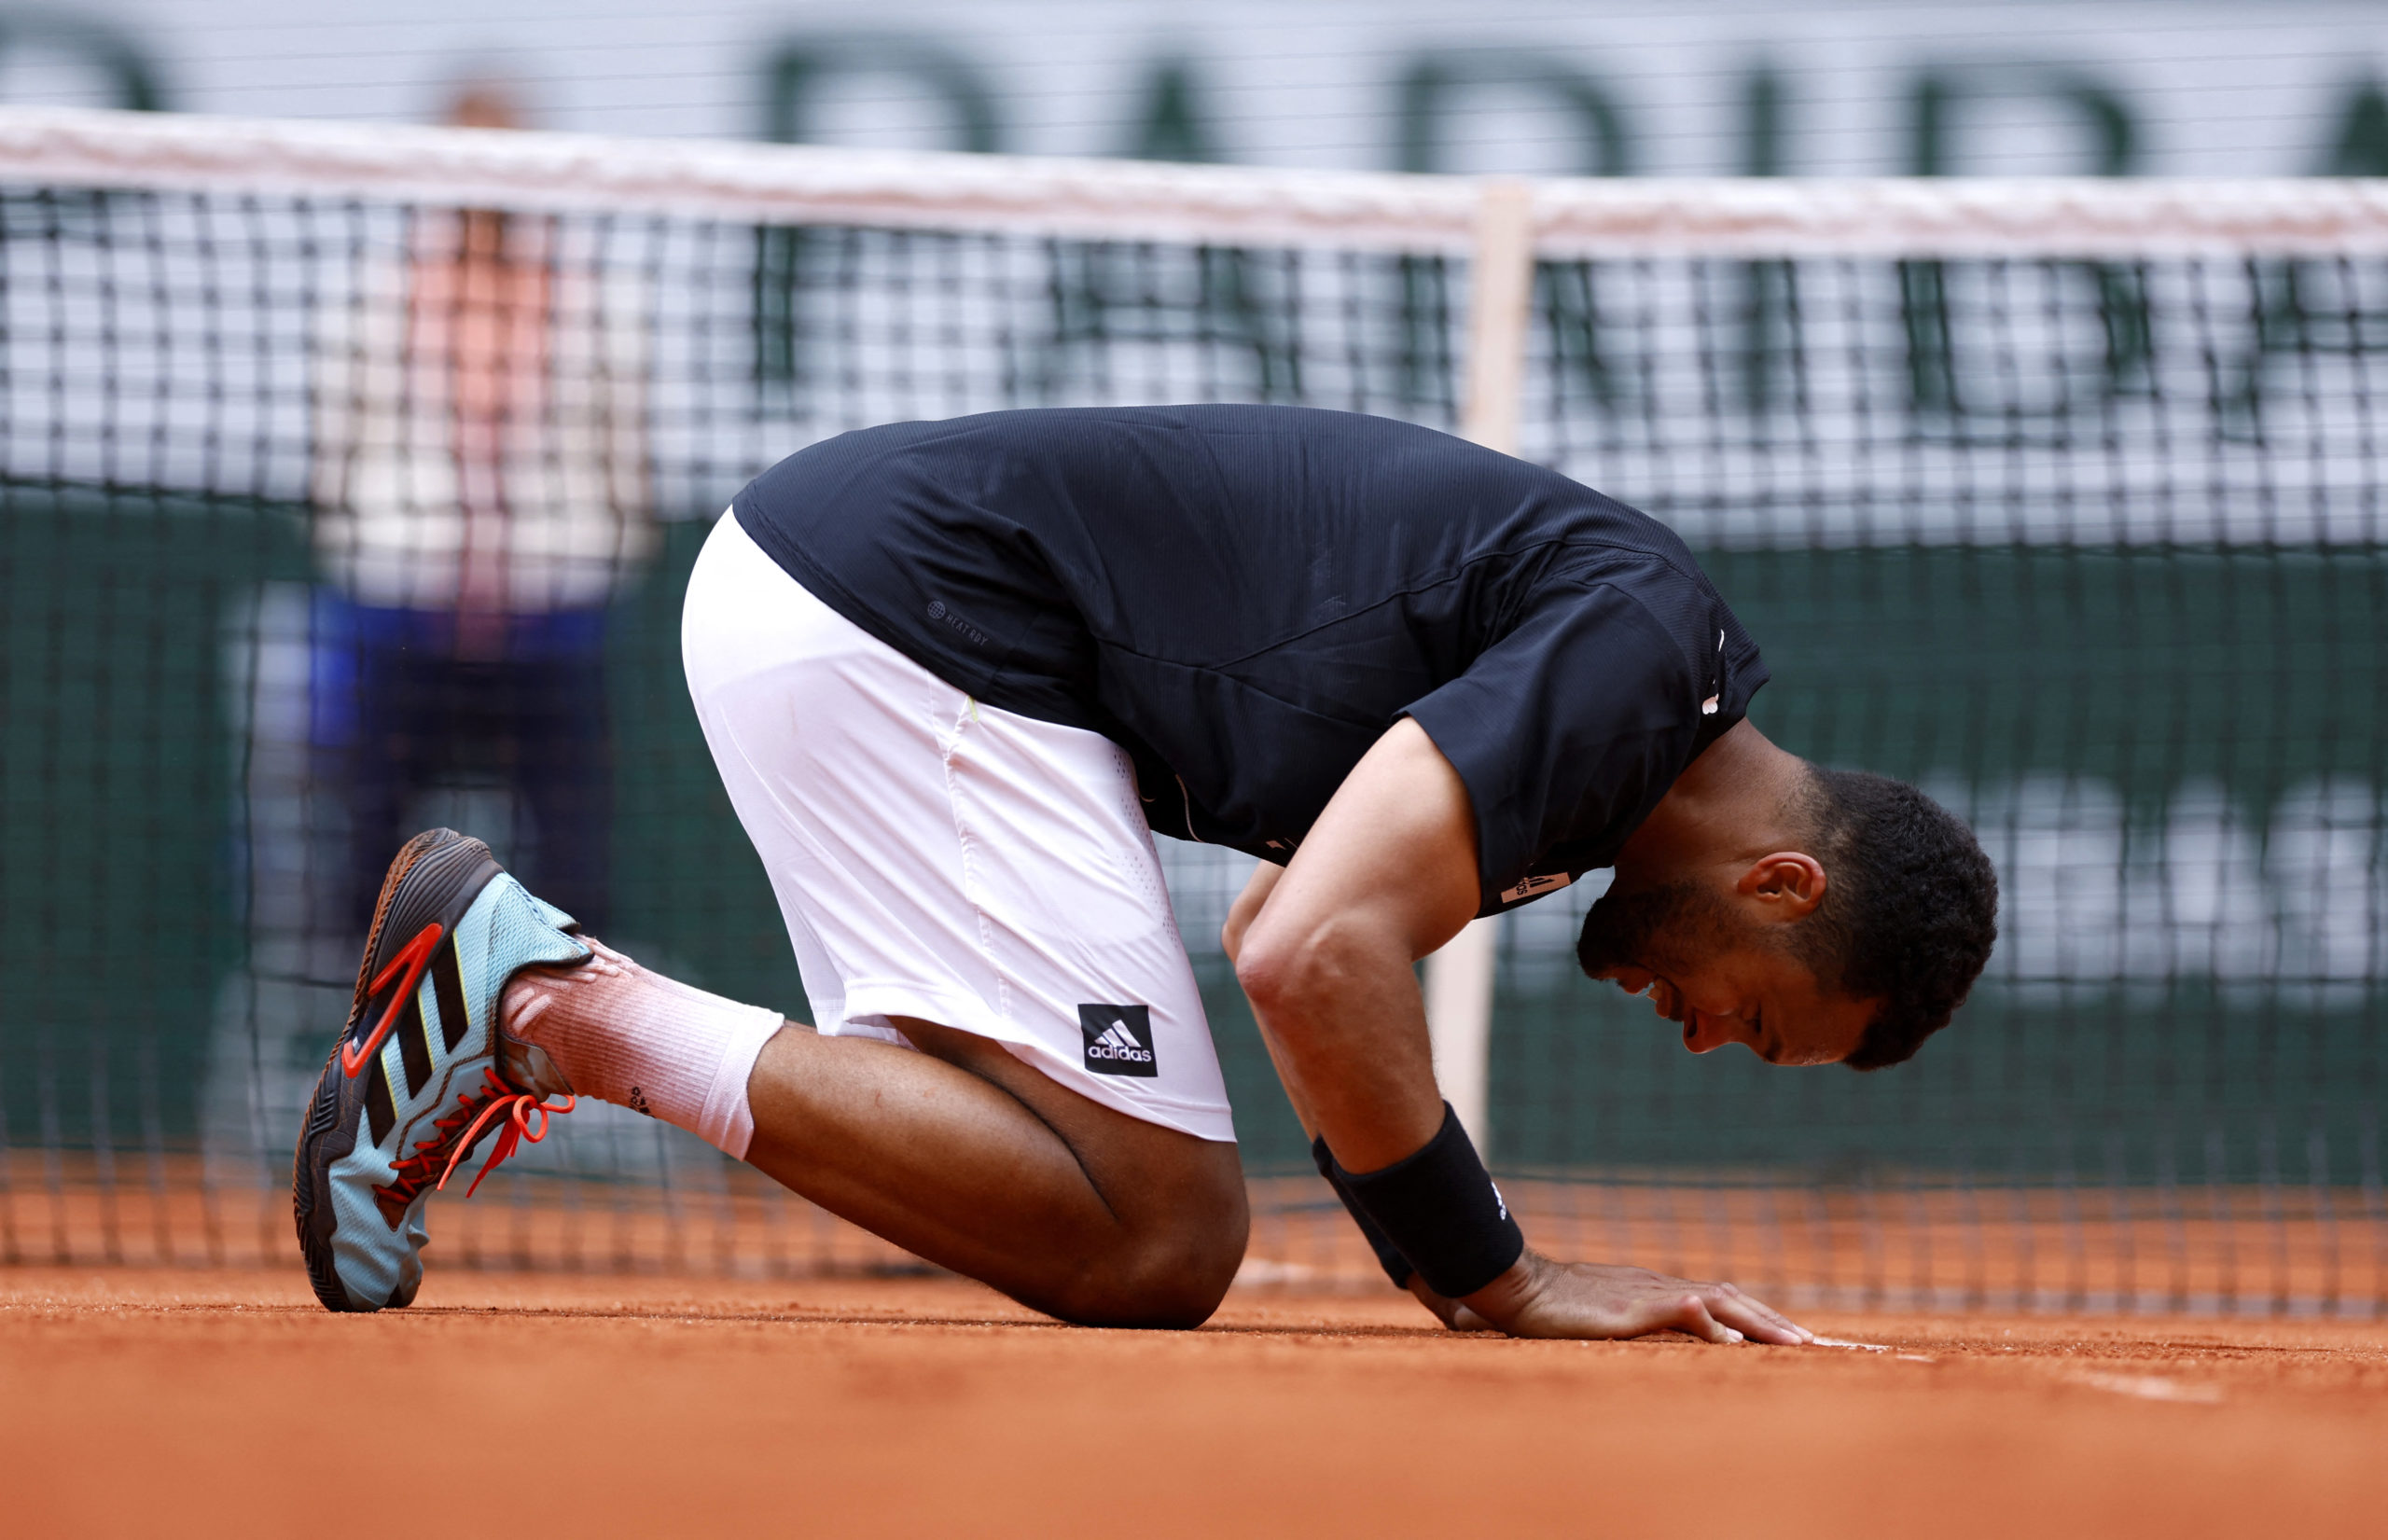 Tennis - French Open - Roland Garros, Paris, France - May 24, 2022 France's Jo-Wilfried Tsonga reacts after playing his final match before retiring, after losing his first round match against Norway's Casper Ruud REUTERS/Gonzalo Fuentes